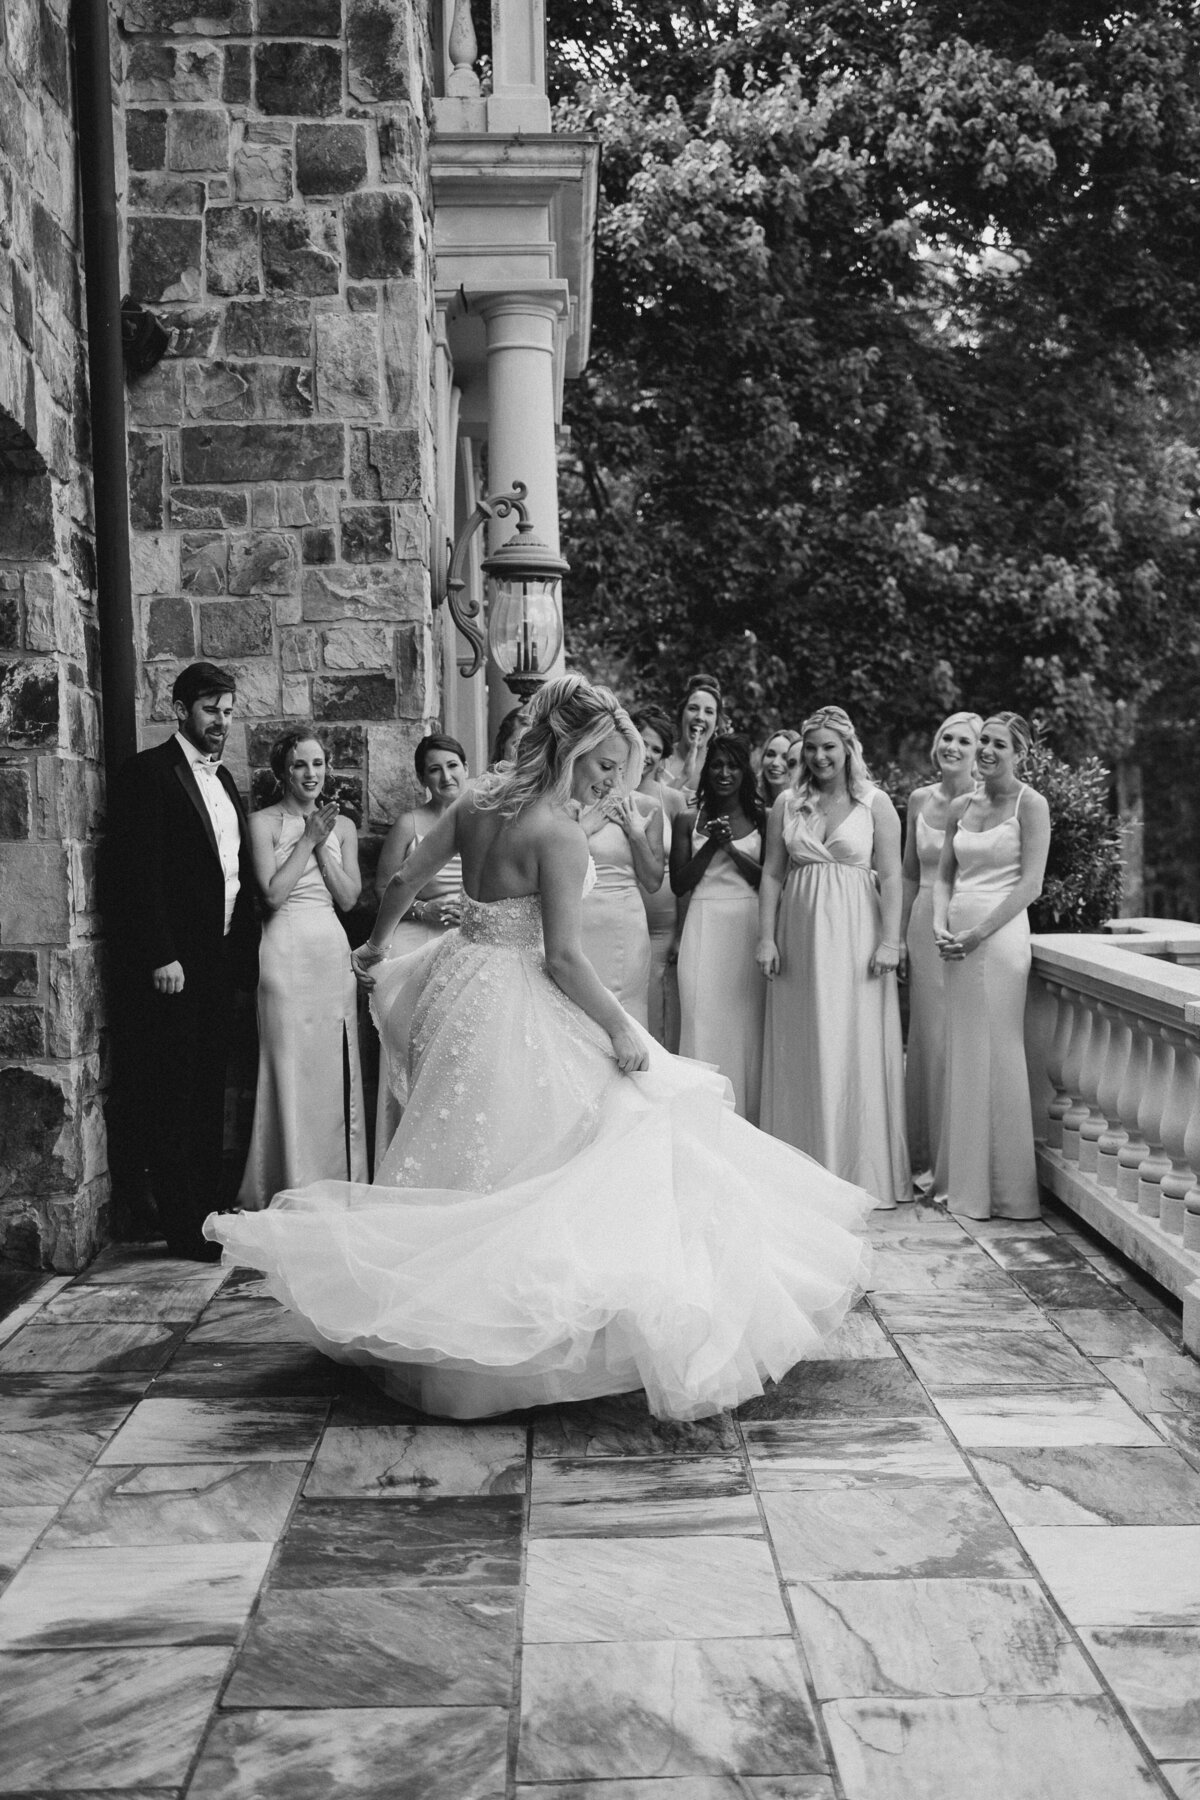 Bride swirling dress in front of bridesmaids